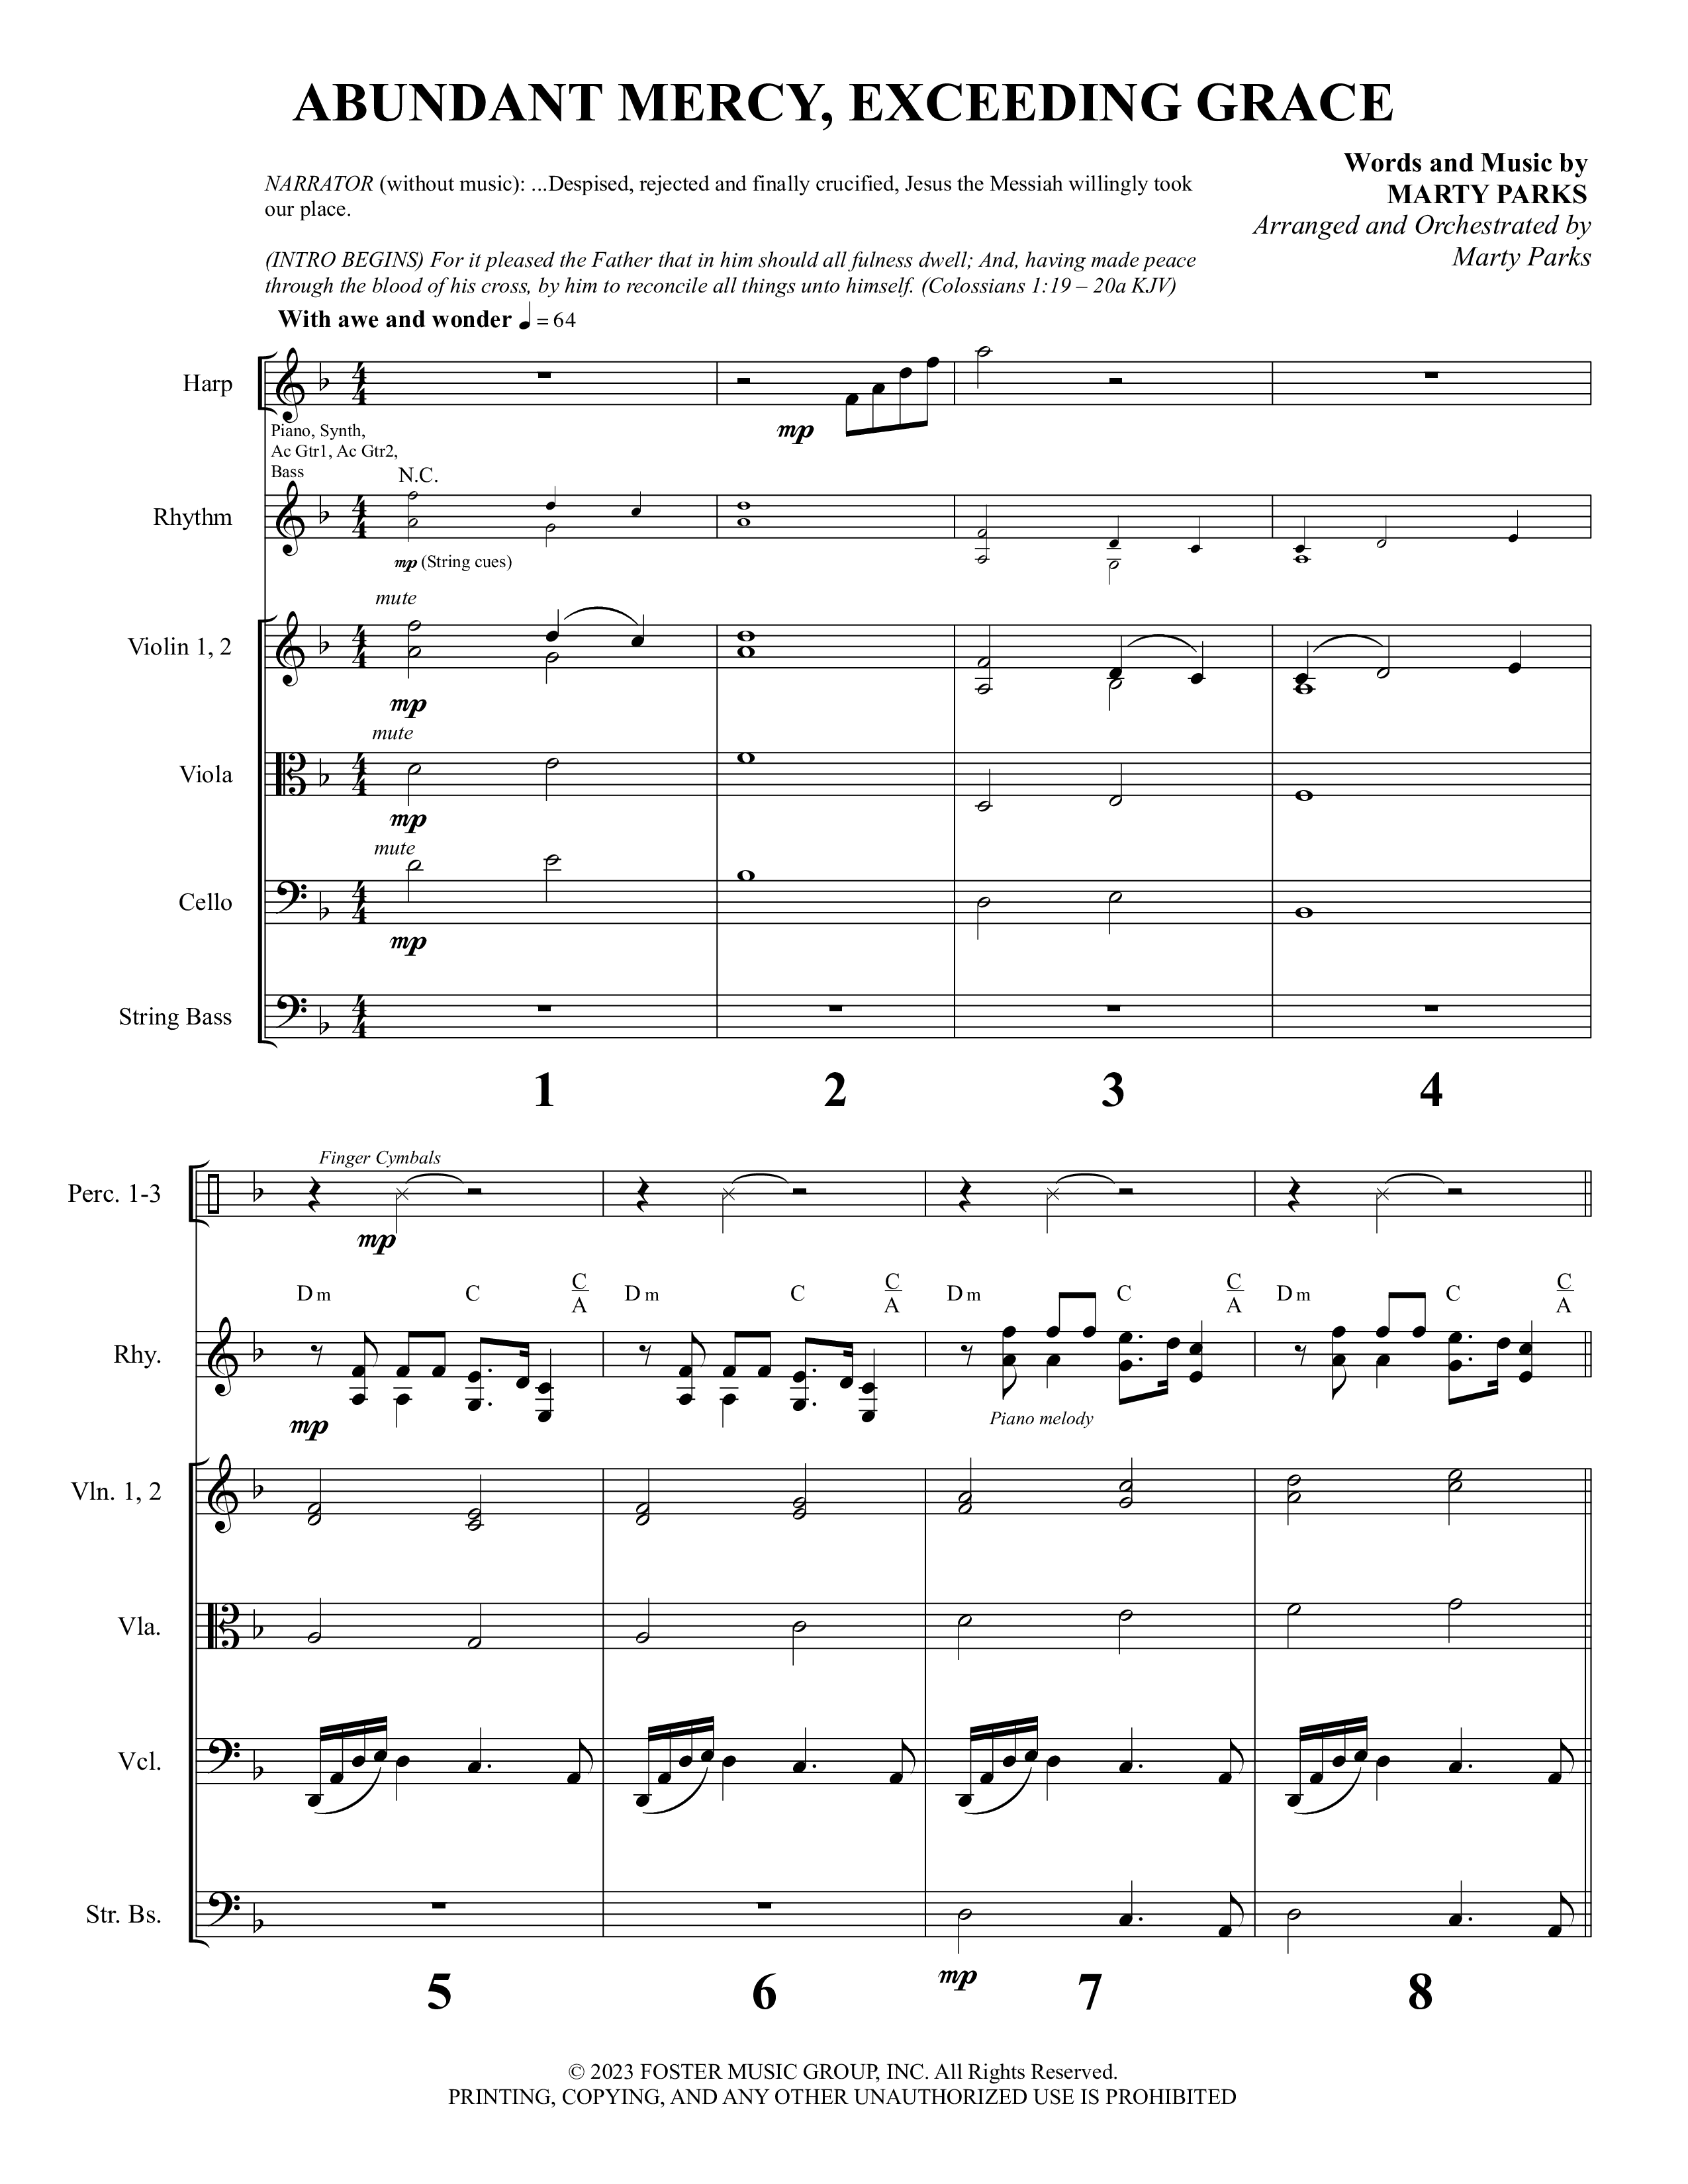 Glorious Cross (5 Song Choral Collection) Song 3 (Orchestration) (Foster Music Group / Arr. Marty Parks)